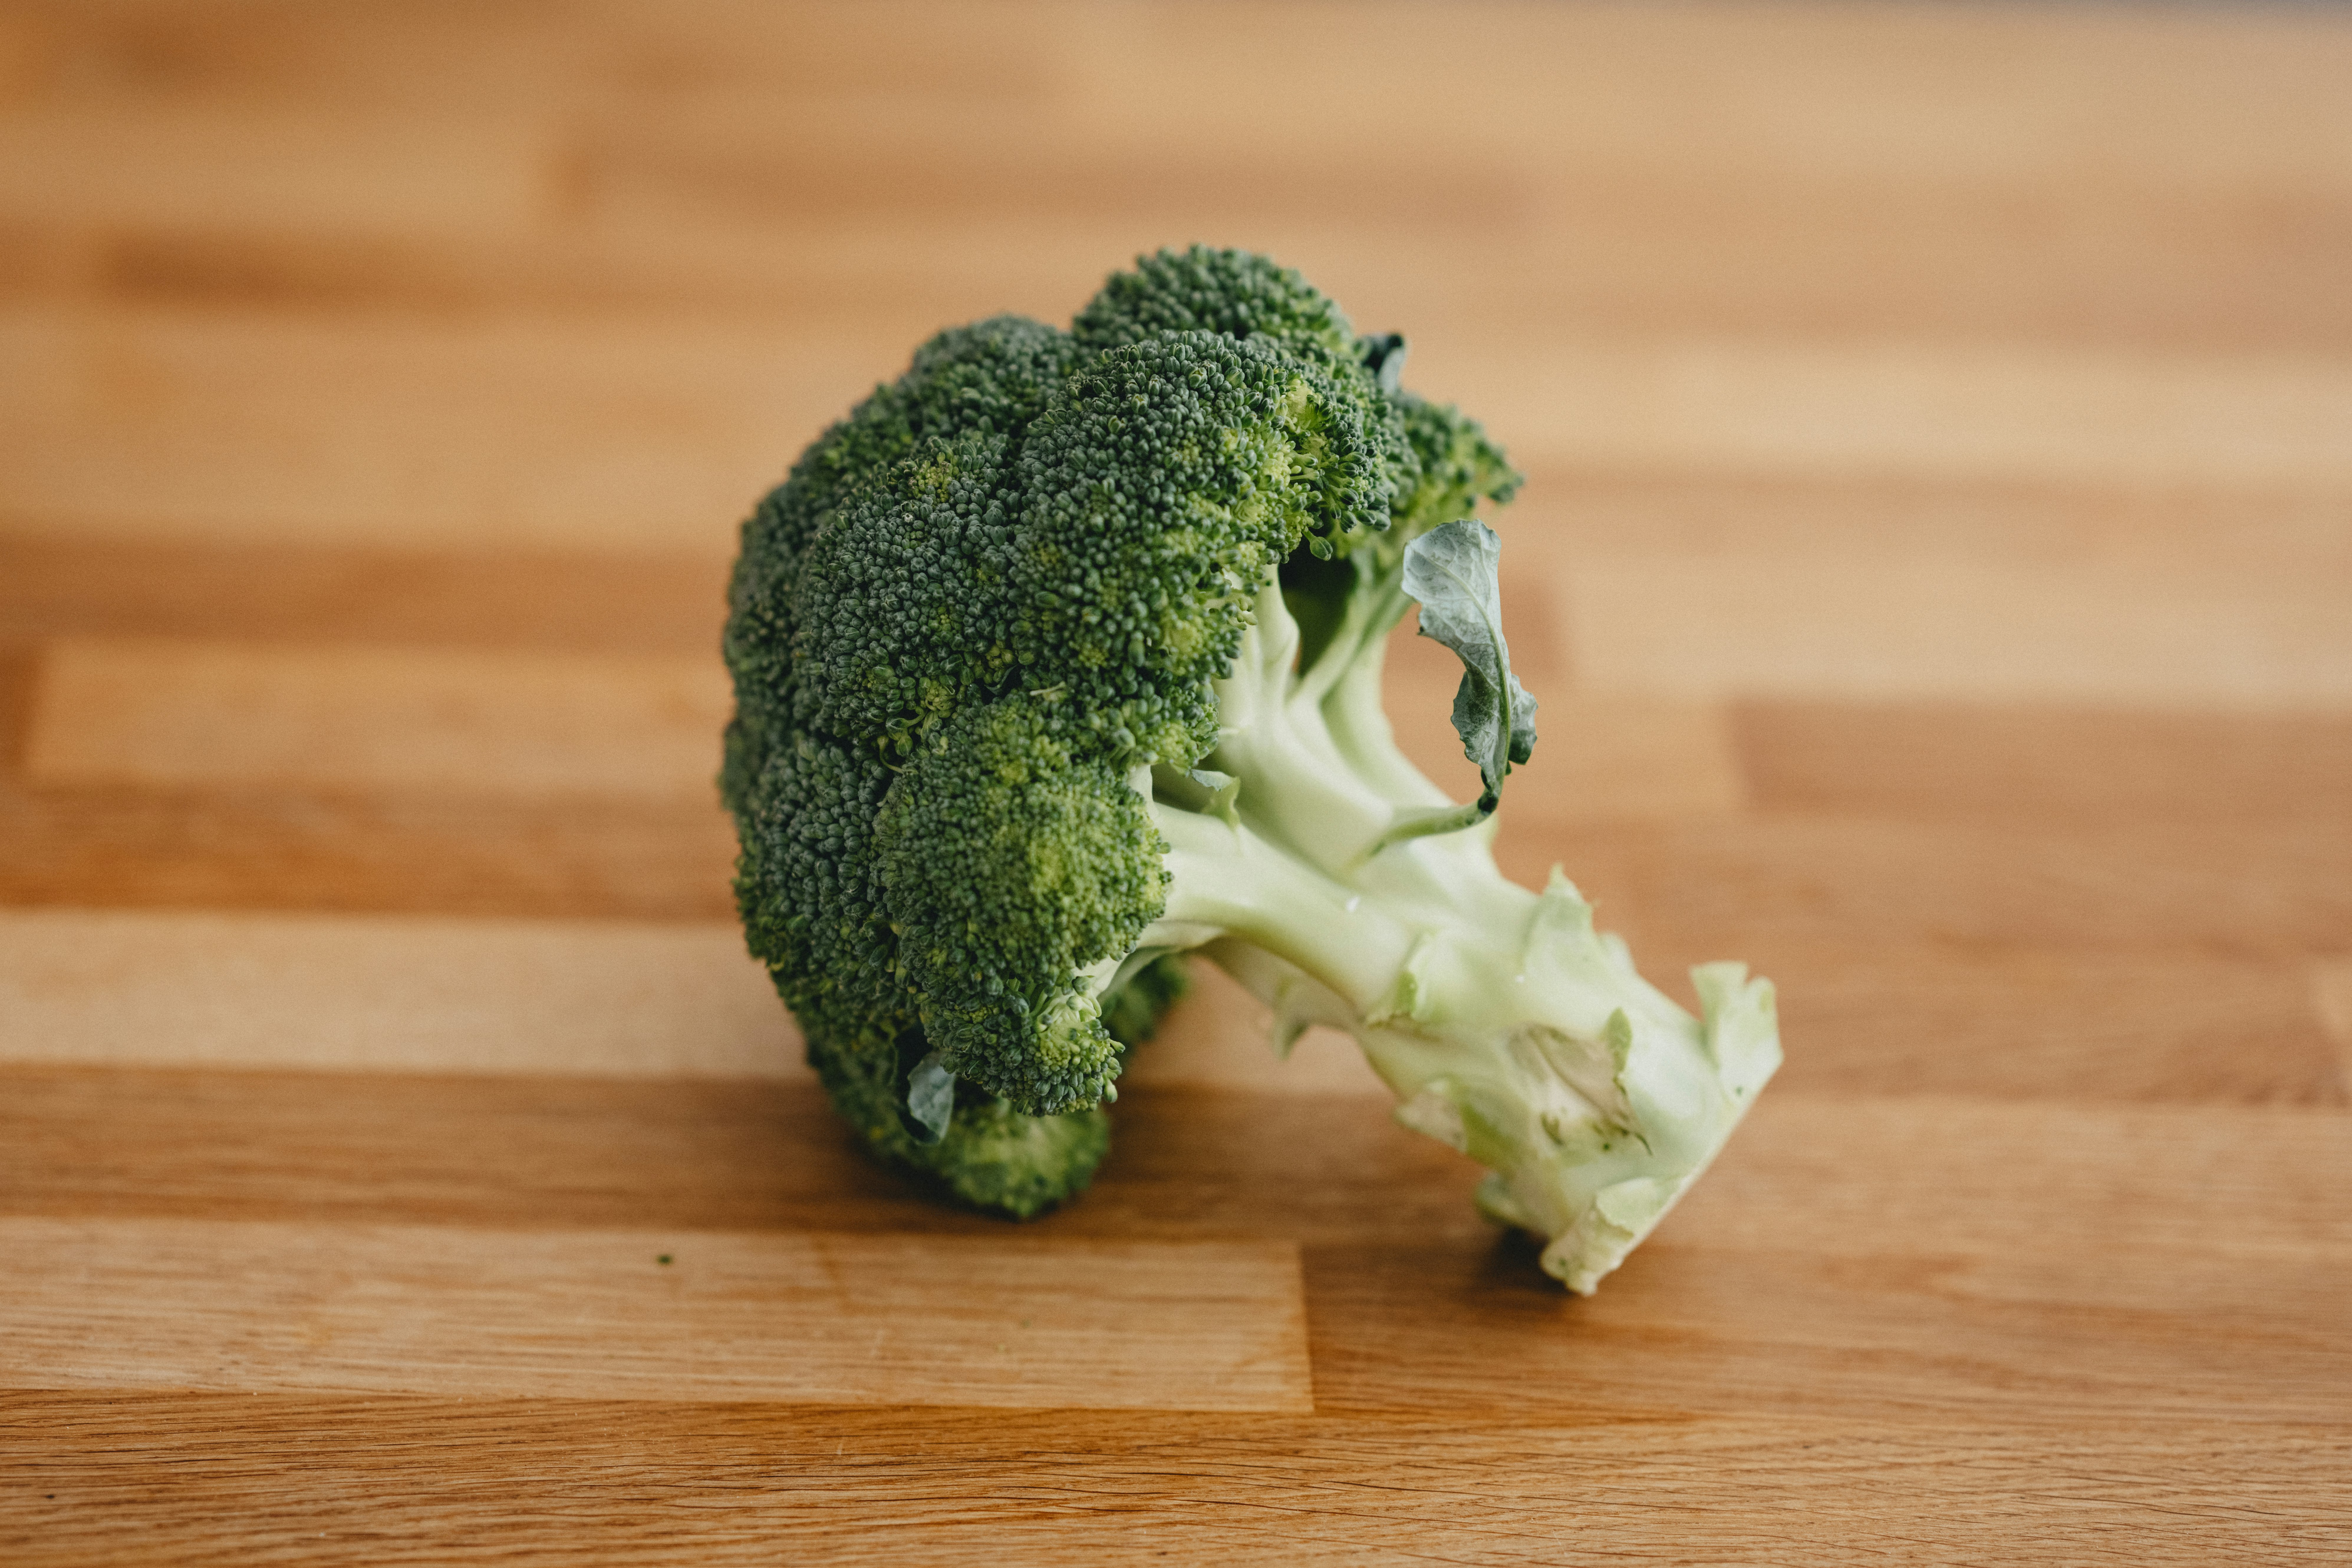 green broccoli on brown wooden table